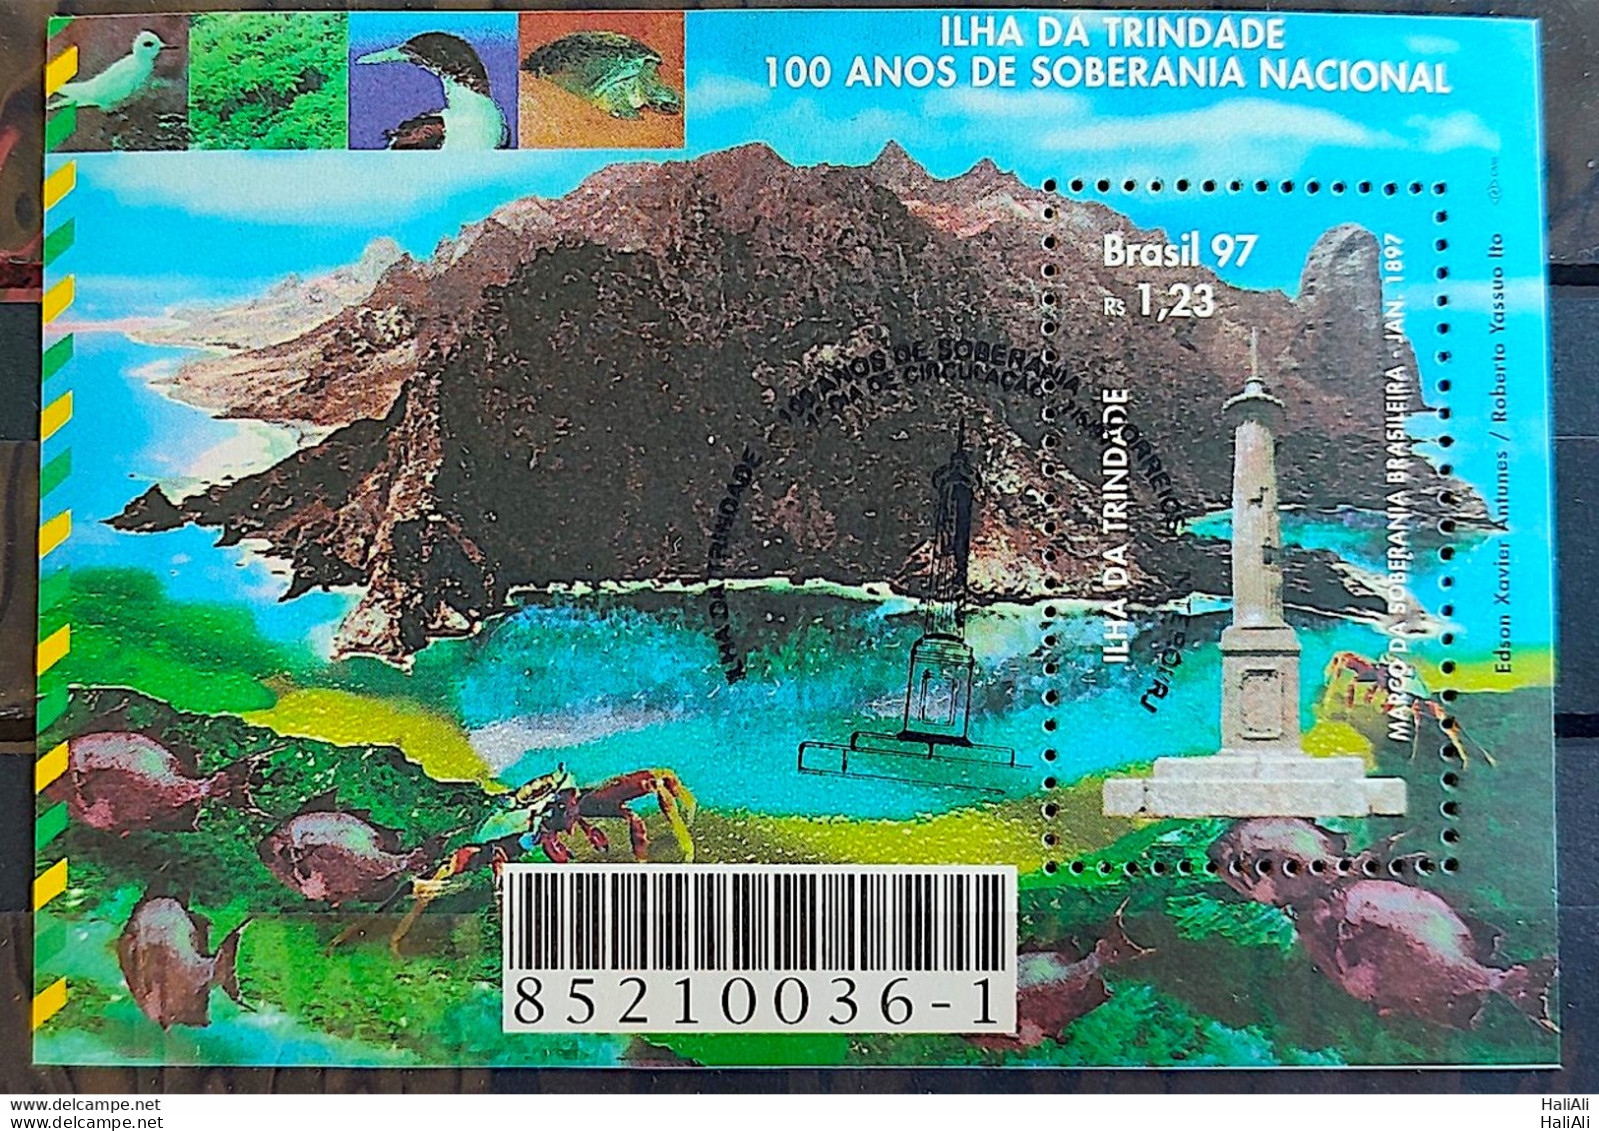 B 108 Brazil Stamp Island Of Trindade Fish Poultry Passers Caranguejo 1997 CBC RJ - Unused Stamps